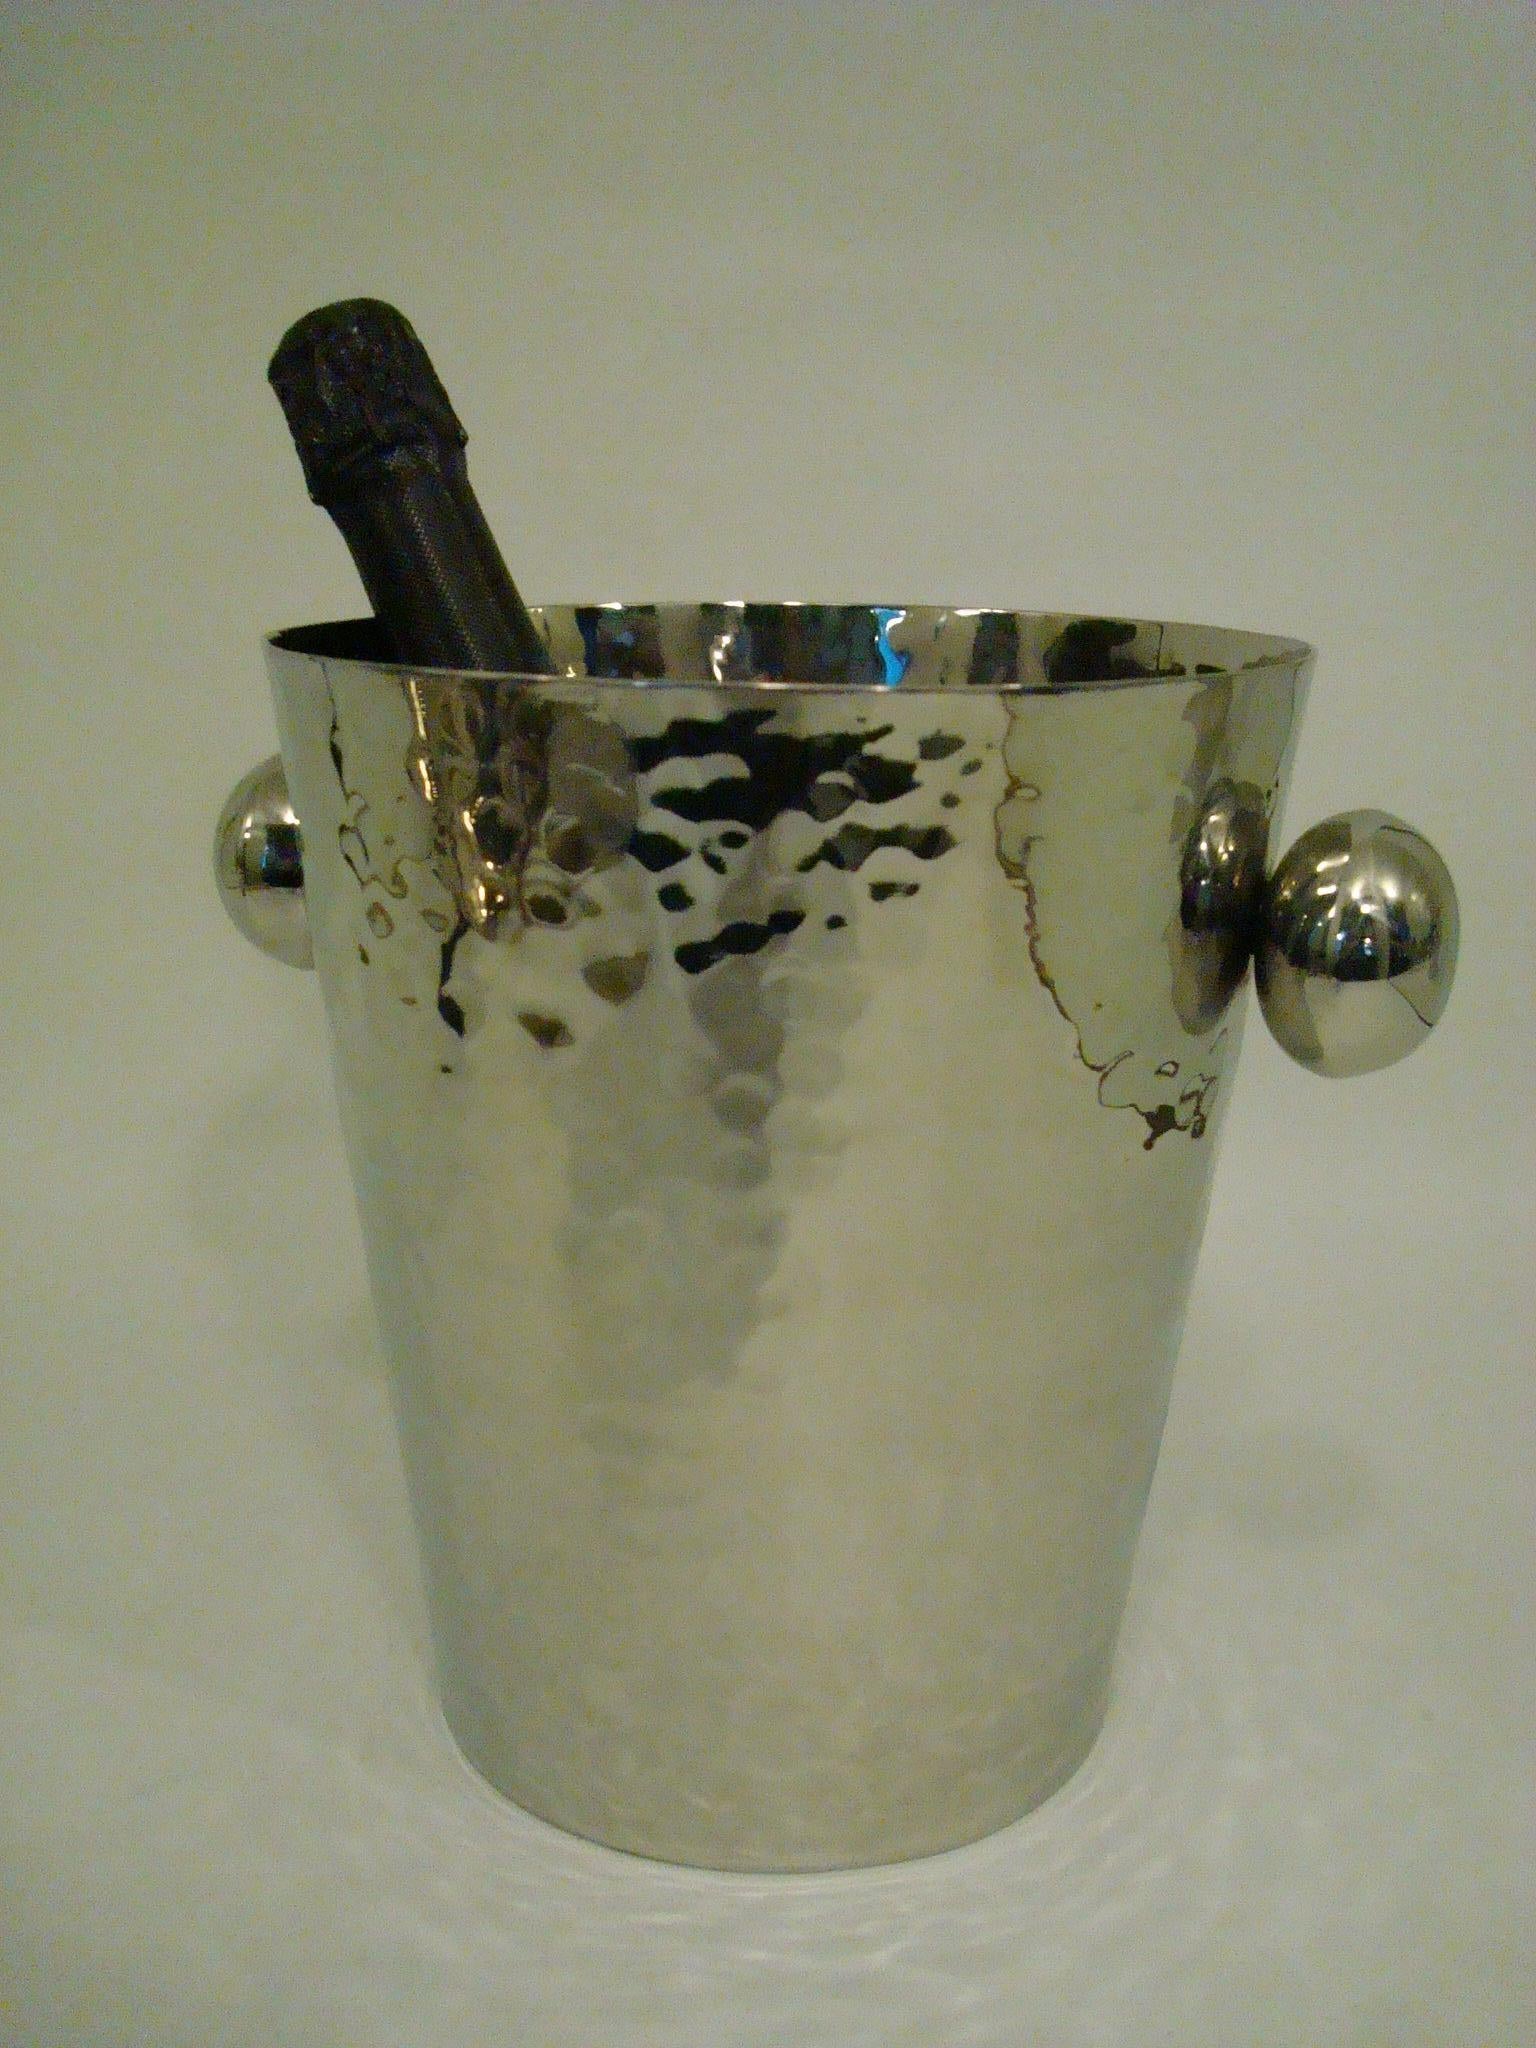 Vintage Martelé (Hammered Metal) Champagne / Wine Cooler Bucket.
 Italy 1960´s. Excellent conditions. Fits well with large bottles (the one on the pictures is a normal size bottle, not included with the cooler).
Very chic mid-century barware item. 
